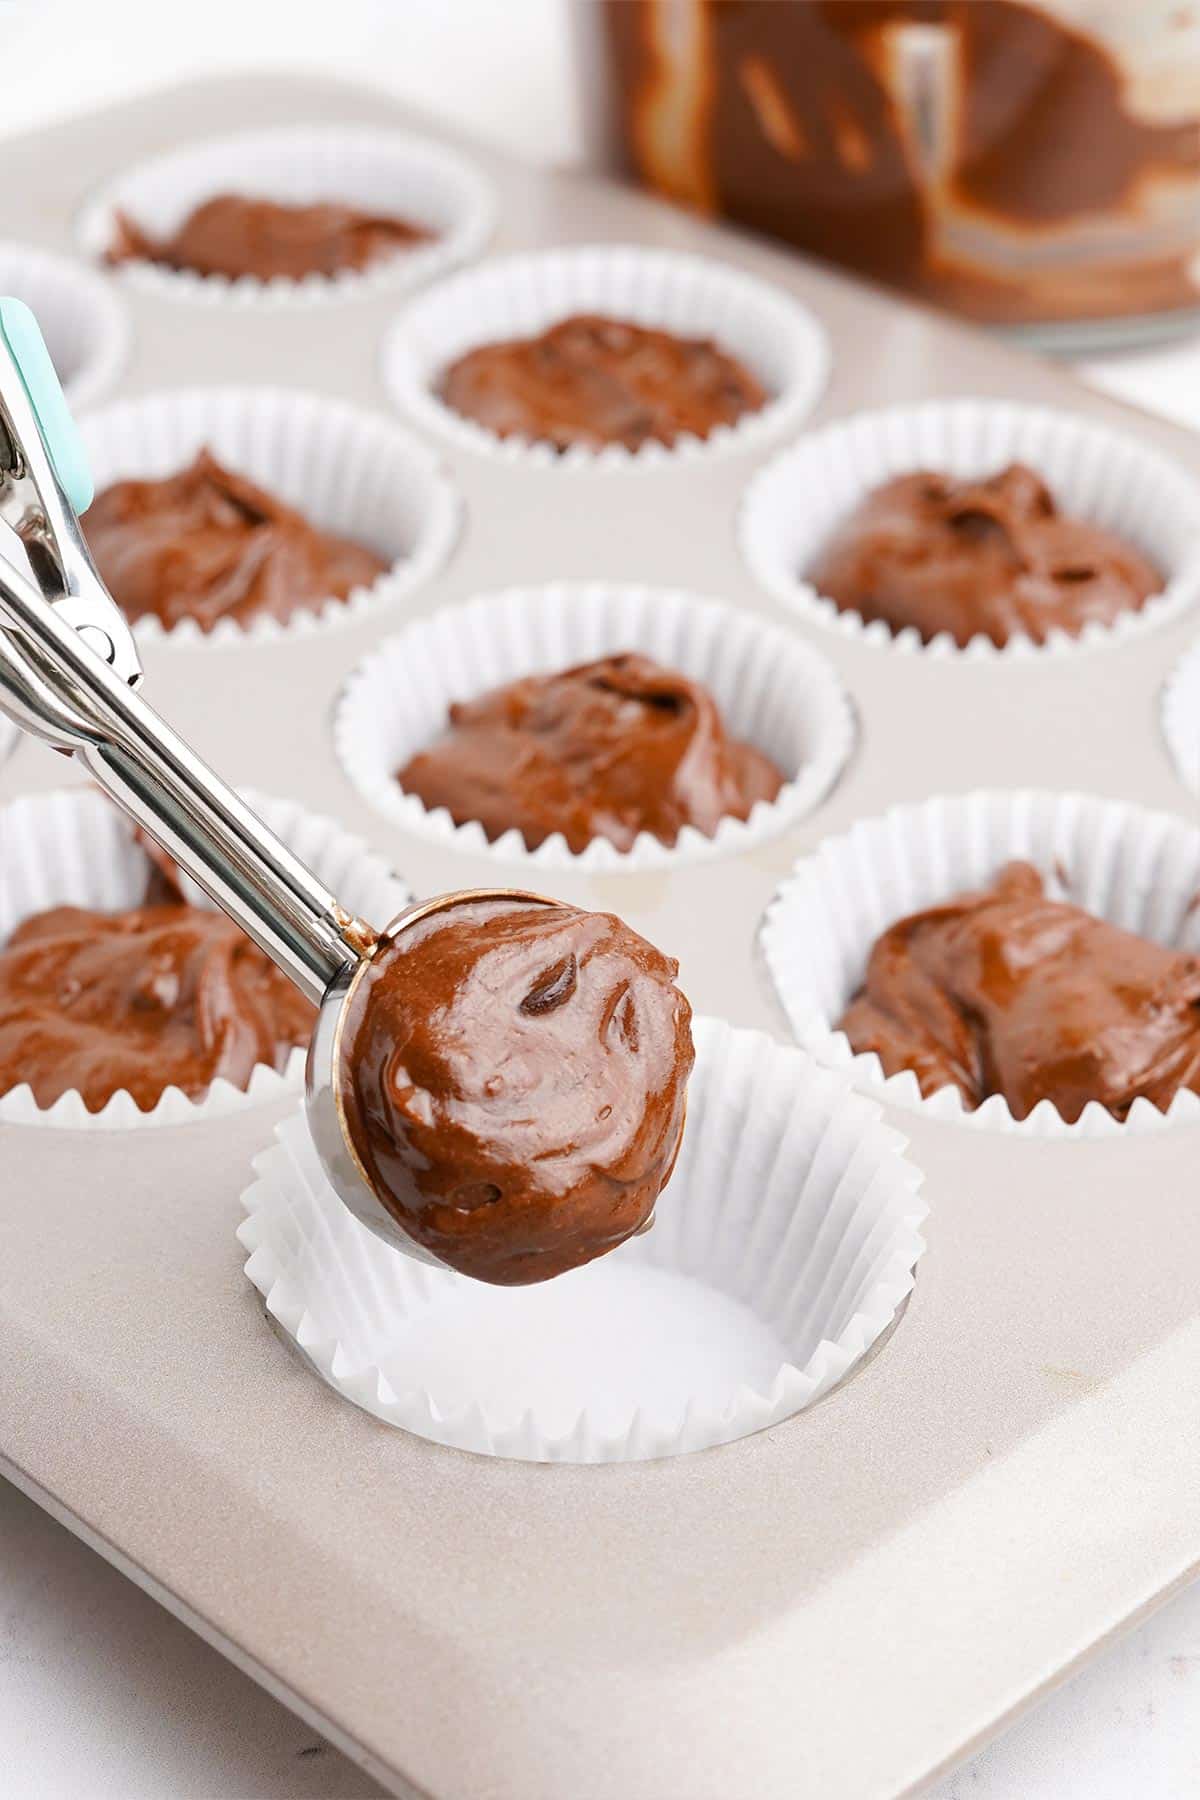 Scooping triple chocolate muffins into paper liners.